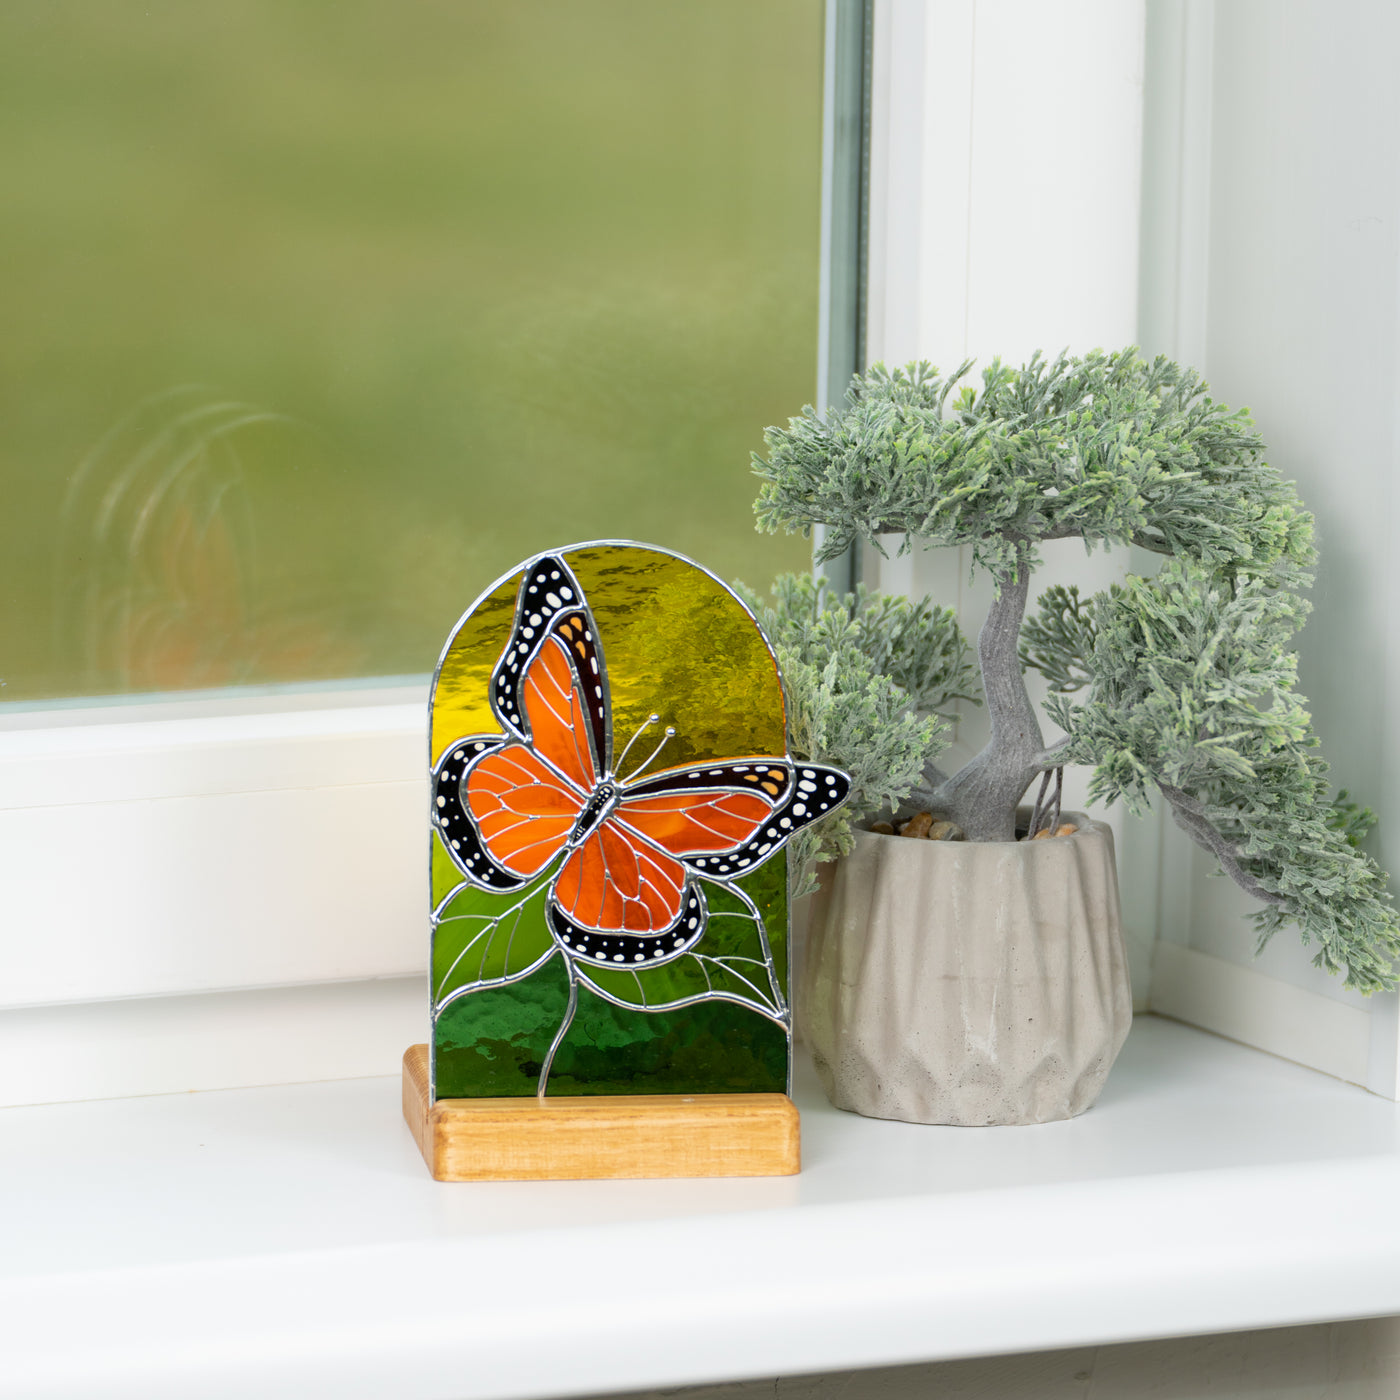 Stained glass monarch butterfly panel in a wooden base in interior